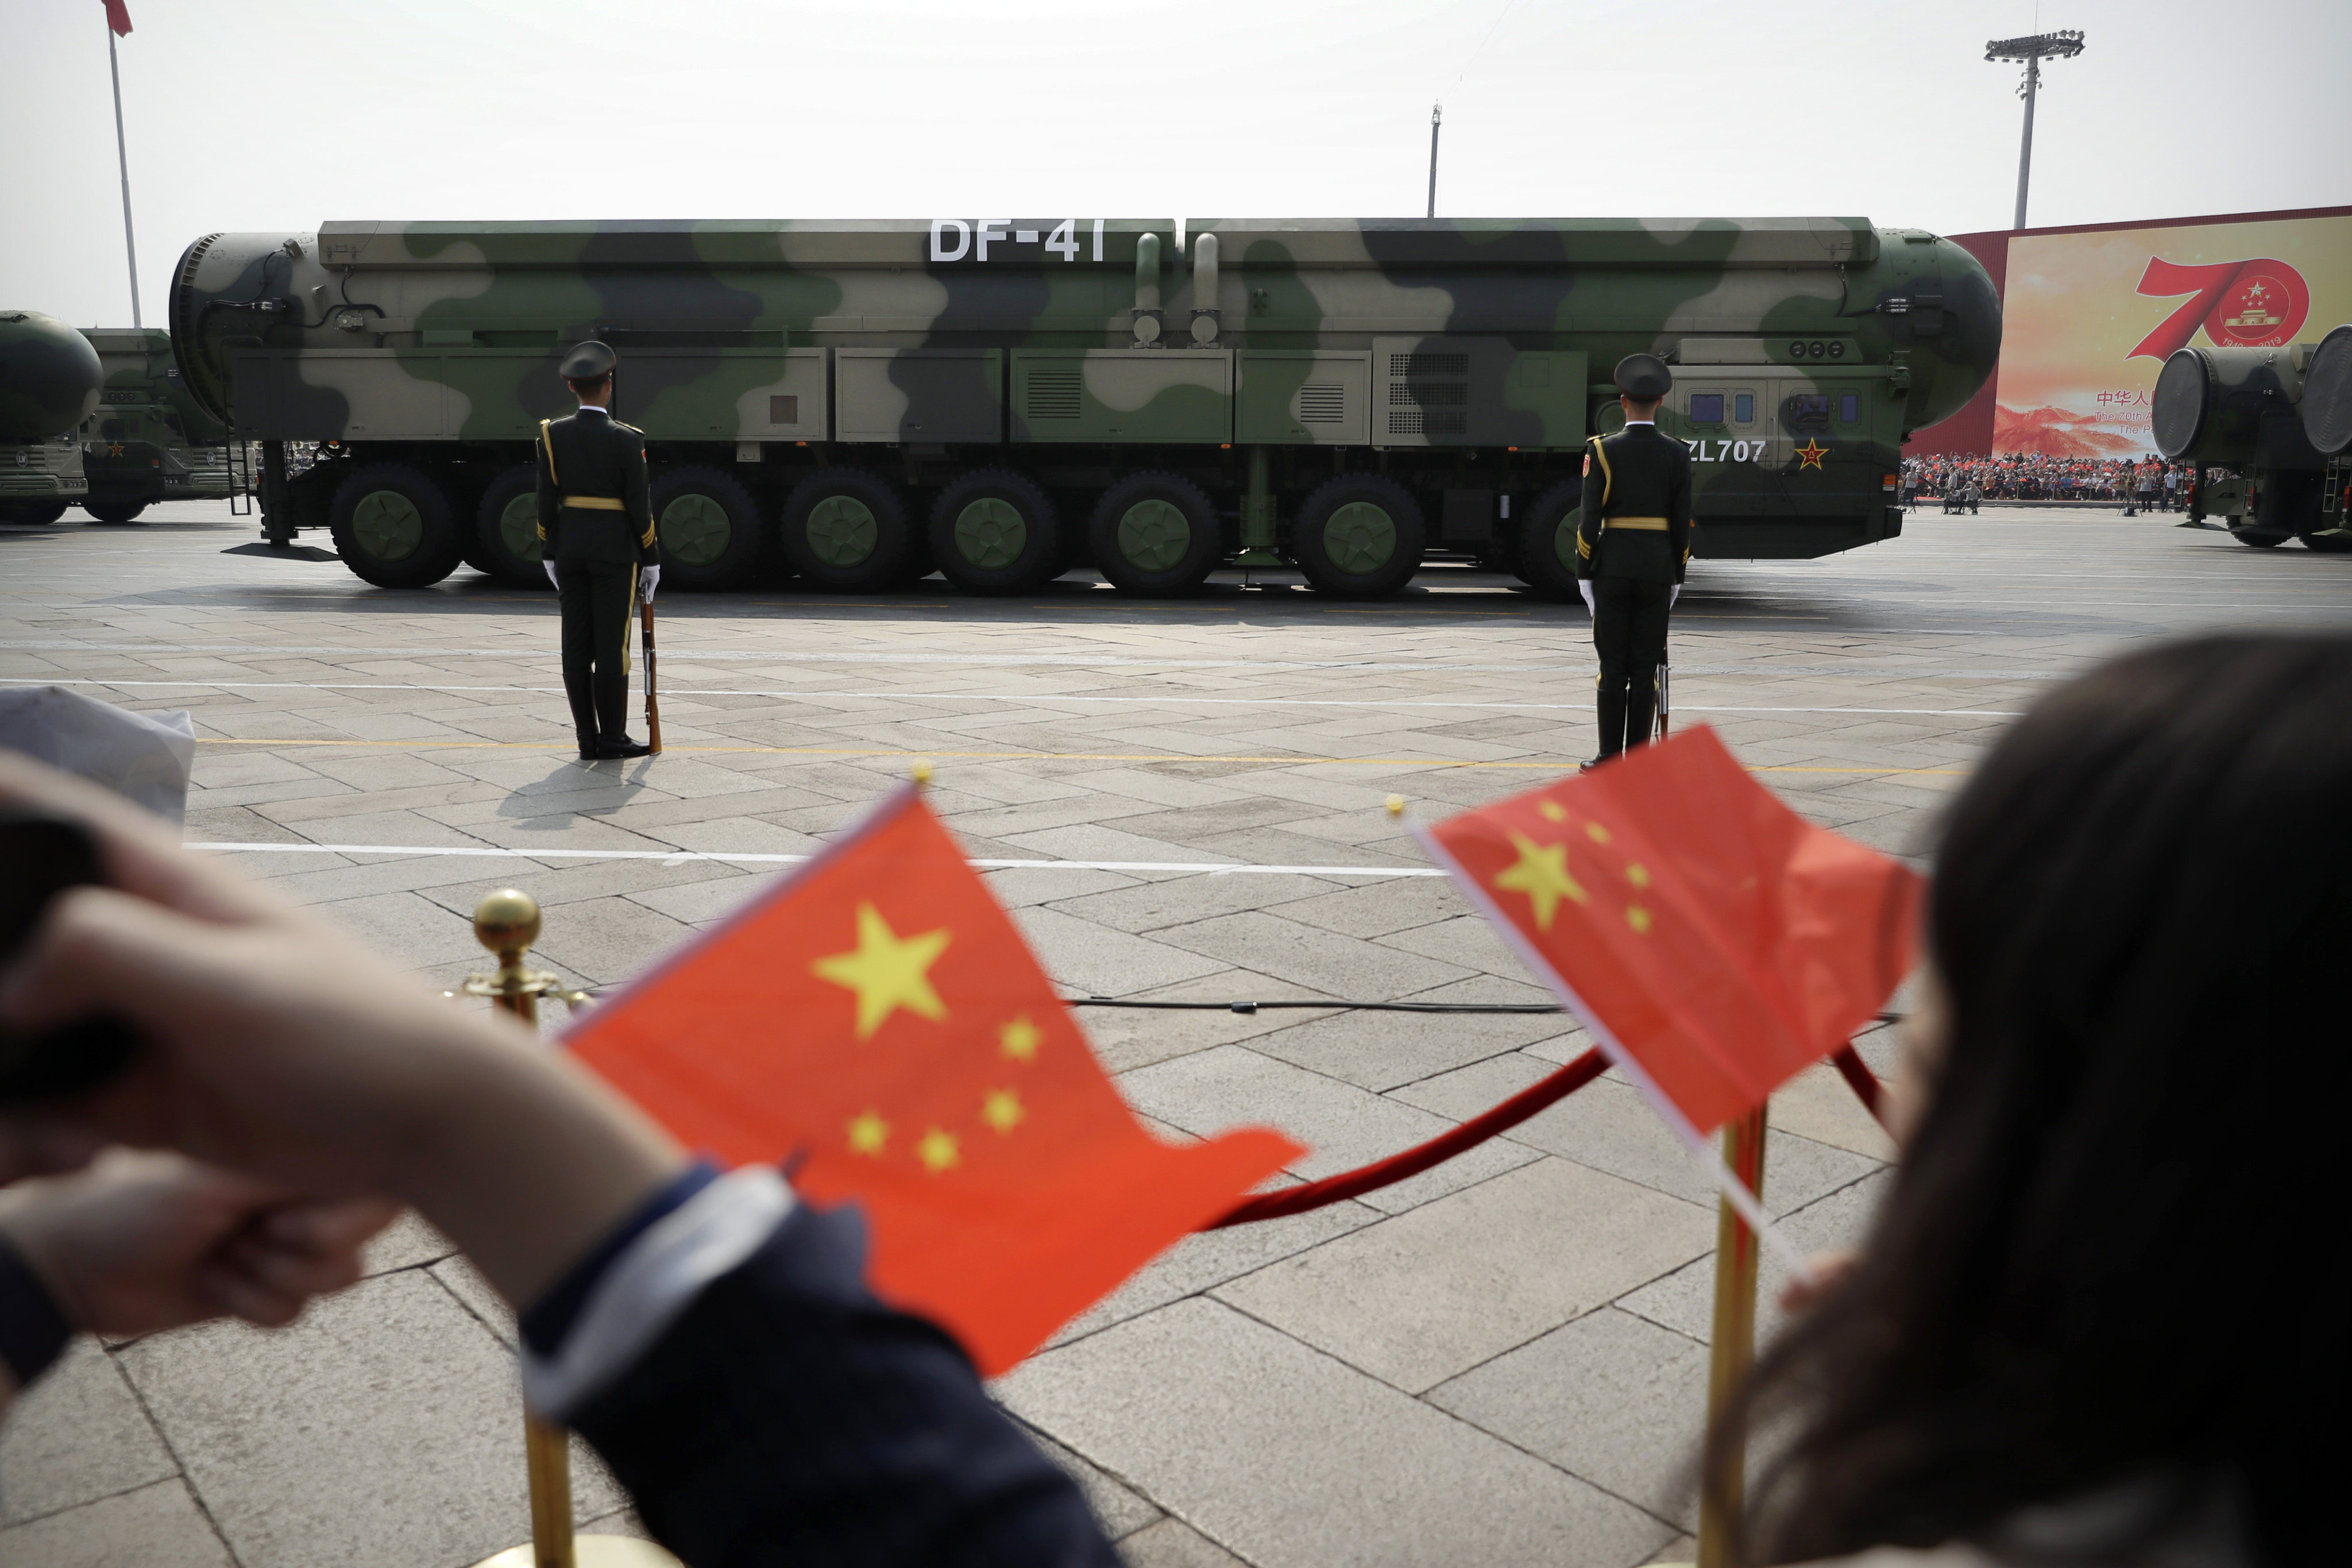 Spectators wave Chinese flags as military vehicles carrying DF-41 ballistic missiles roll past during a parade on October 1, 2019. China is expanding its nuclear force much faster than US officials predicted. Photo: AP